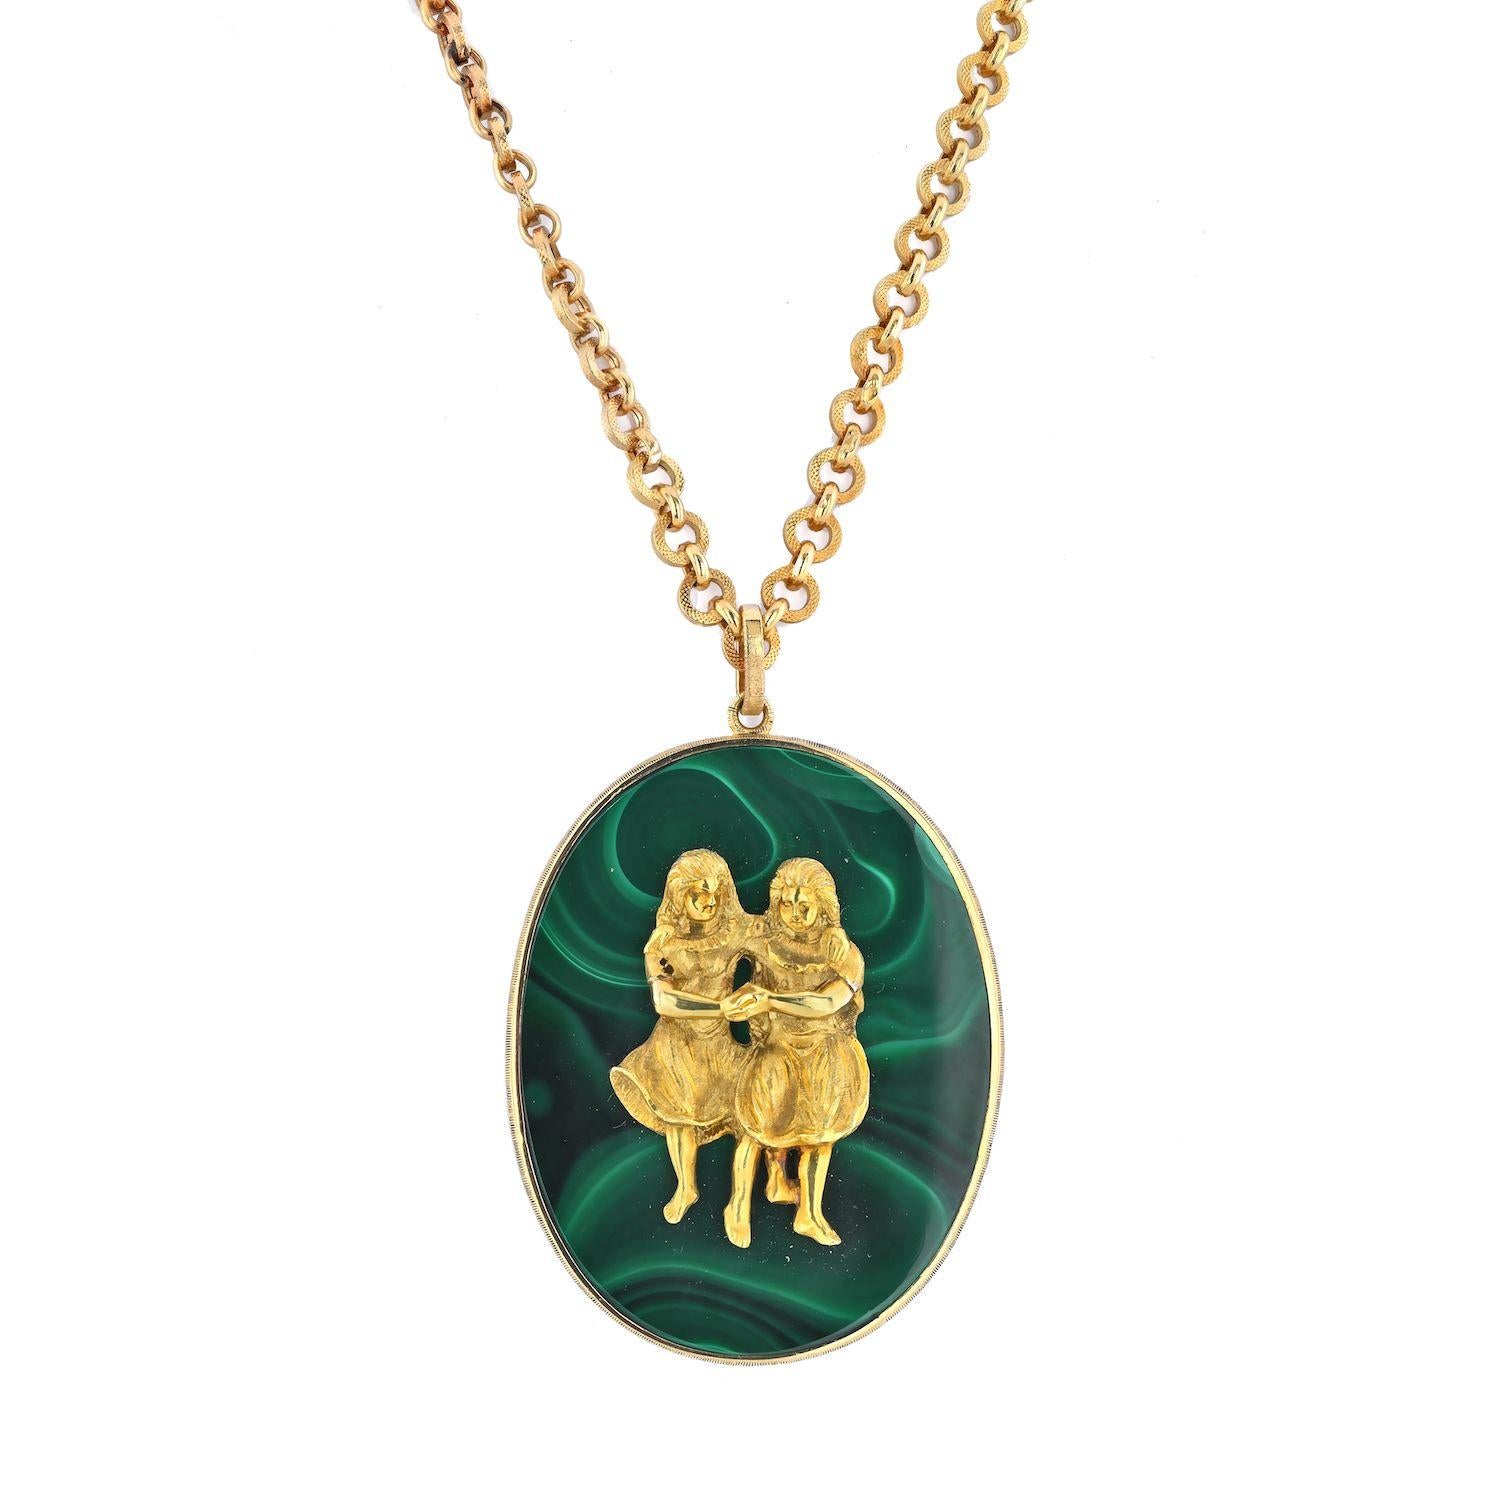 Buccellati 18K Yellow Gold Gemini Malachite Medallion Pendant.
Large 18k gold and malachite Gemini pendant on a long chain, both by Buccellati. Depicting two girls holding hands. The necklace is 25 in long, pendant - 73mm with bale x 48mm. Marked: